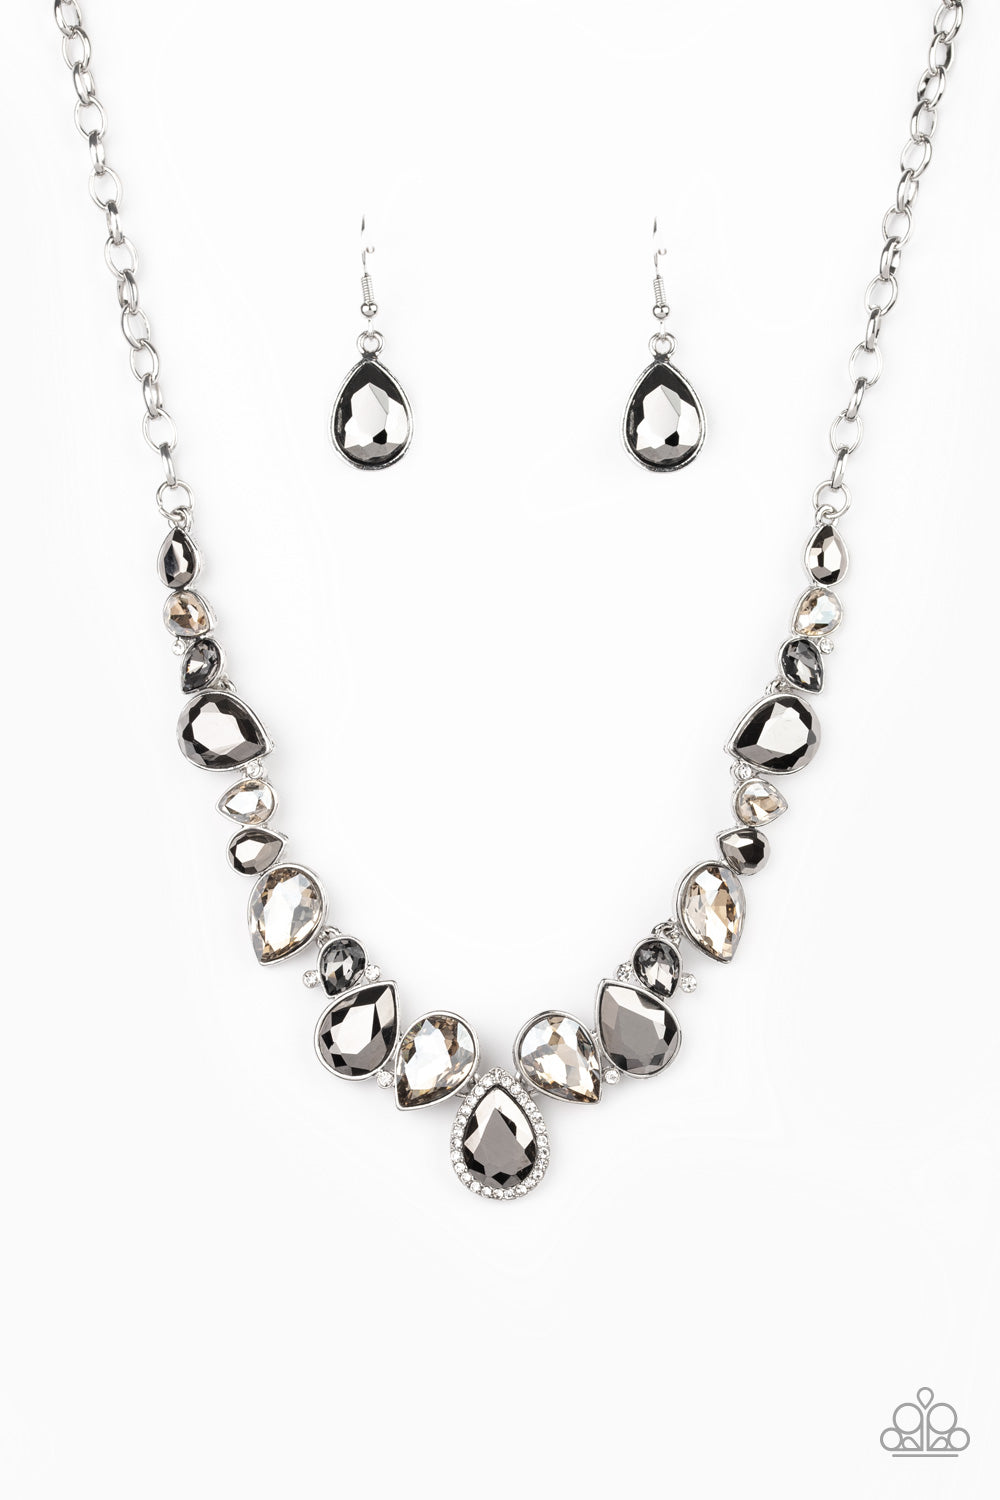 I Want It All - Silver - Paparazzi Necklace